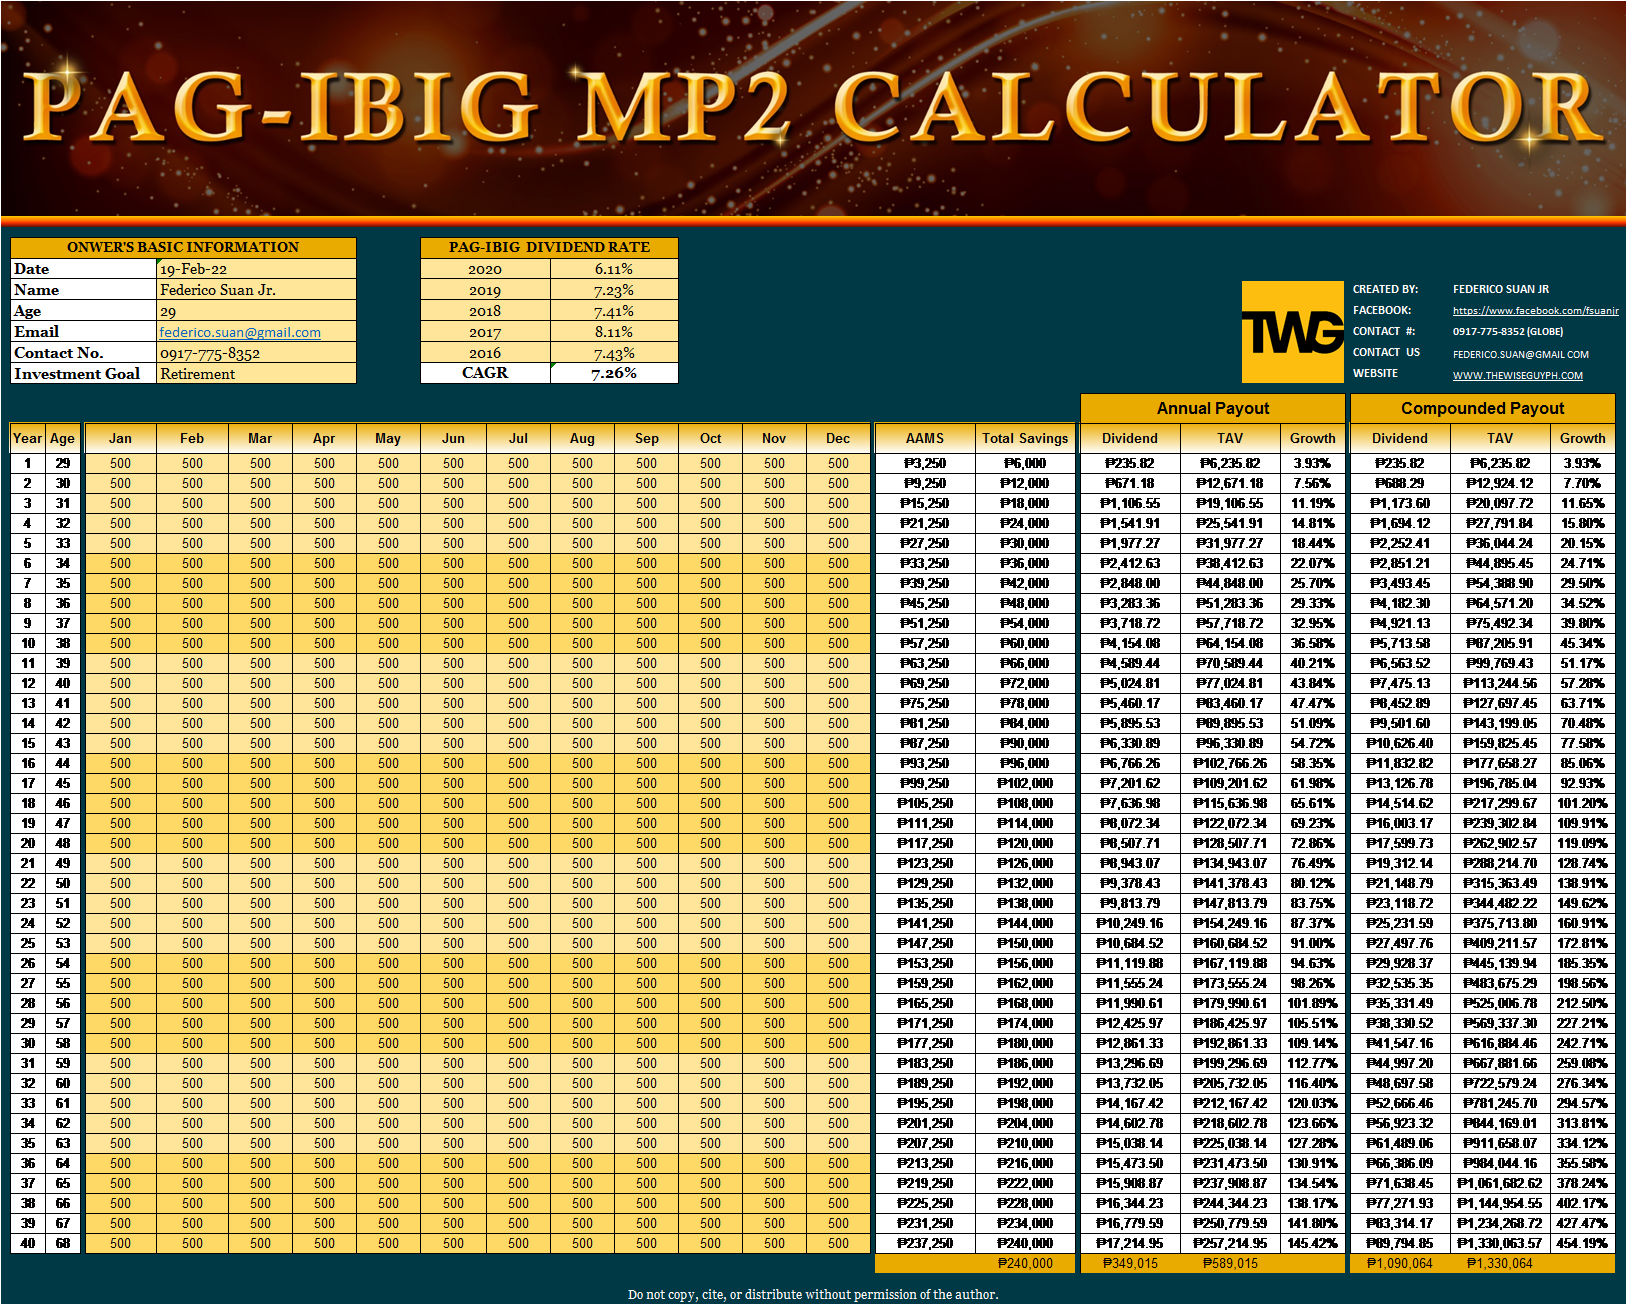 PagIBIG MP2 Calculator An Easy Way to Strategize Your Investment